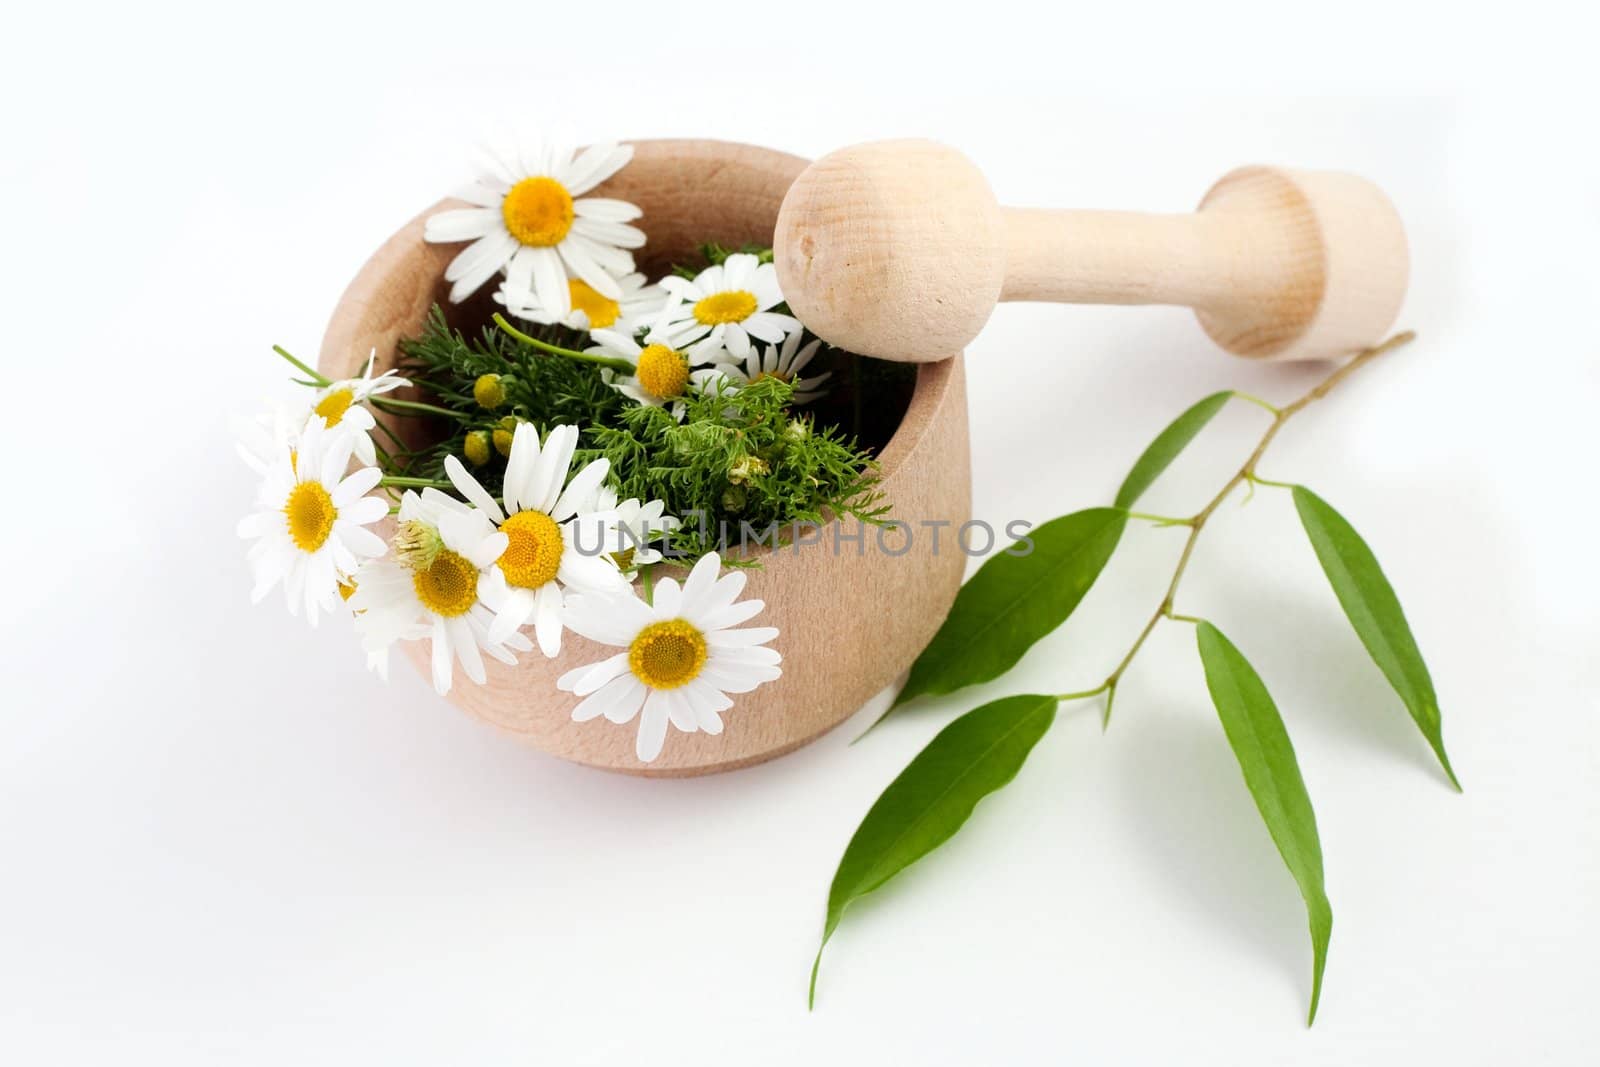 An image of white flowers in a wooden mortar